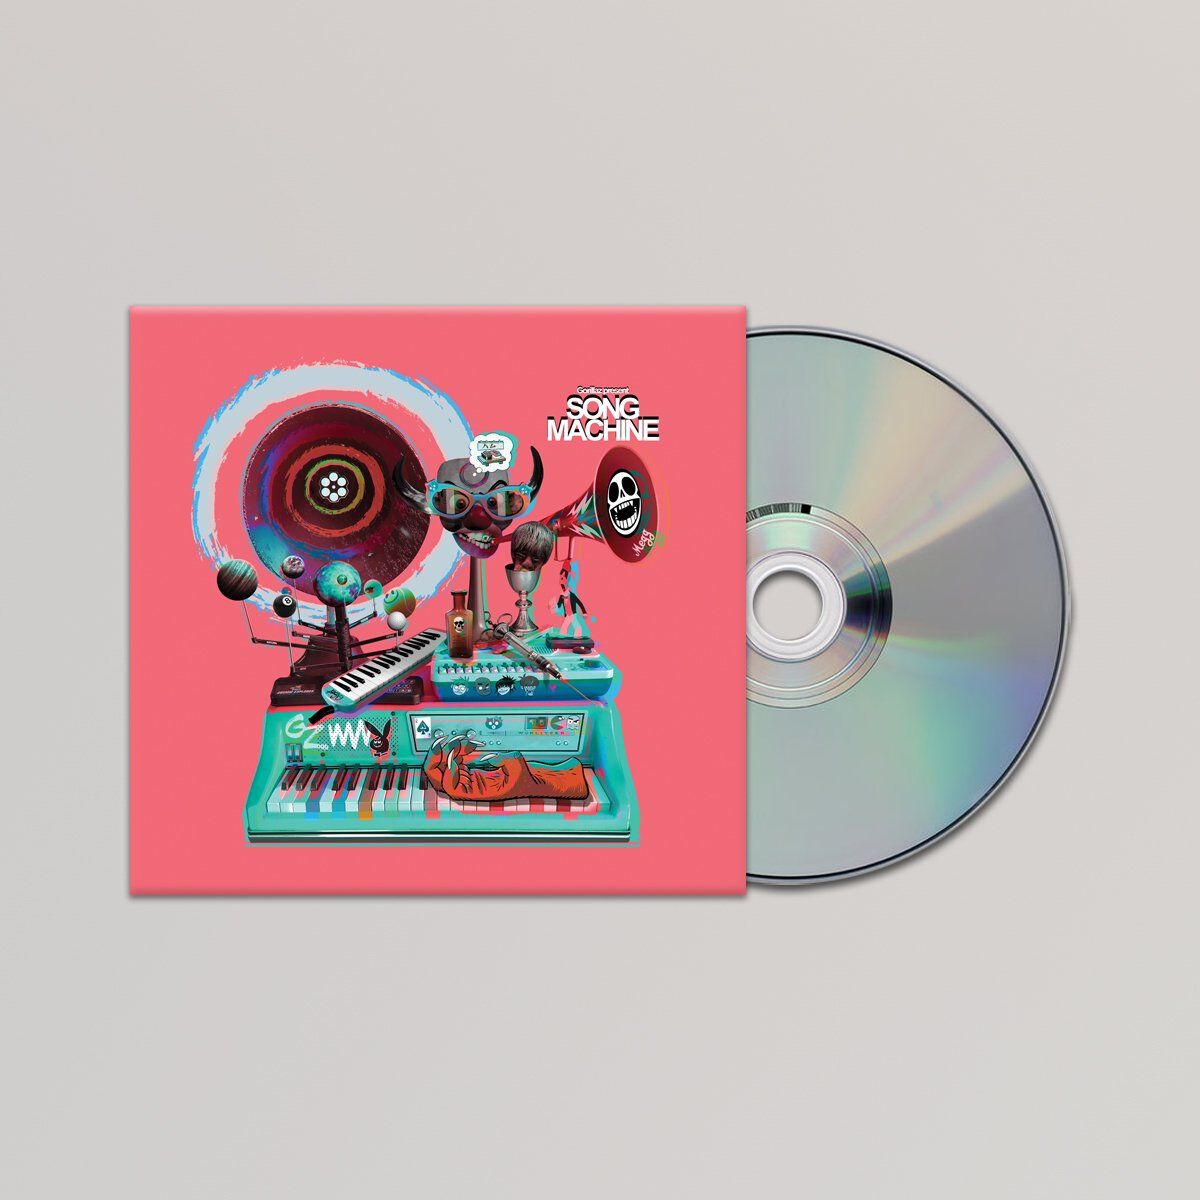 Song Machine, Season One Deluxe CD | Gorillaz Official Store